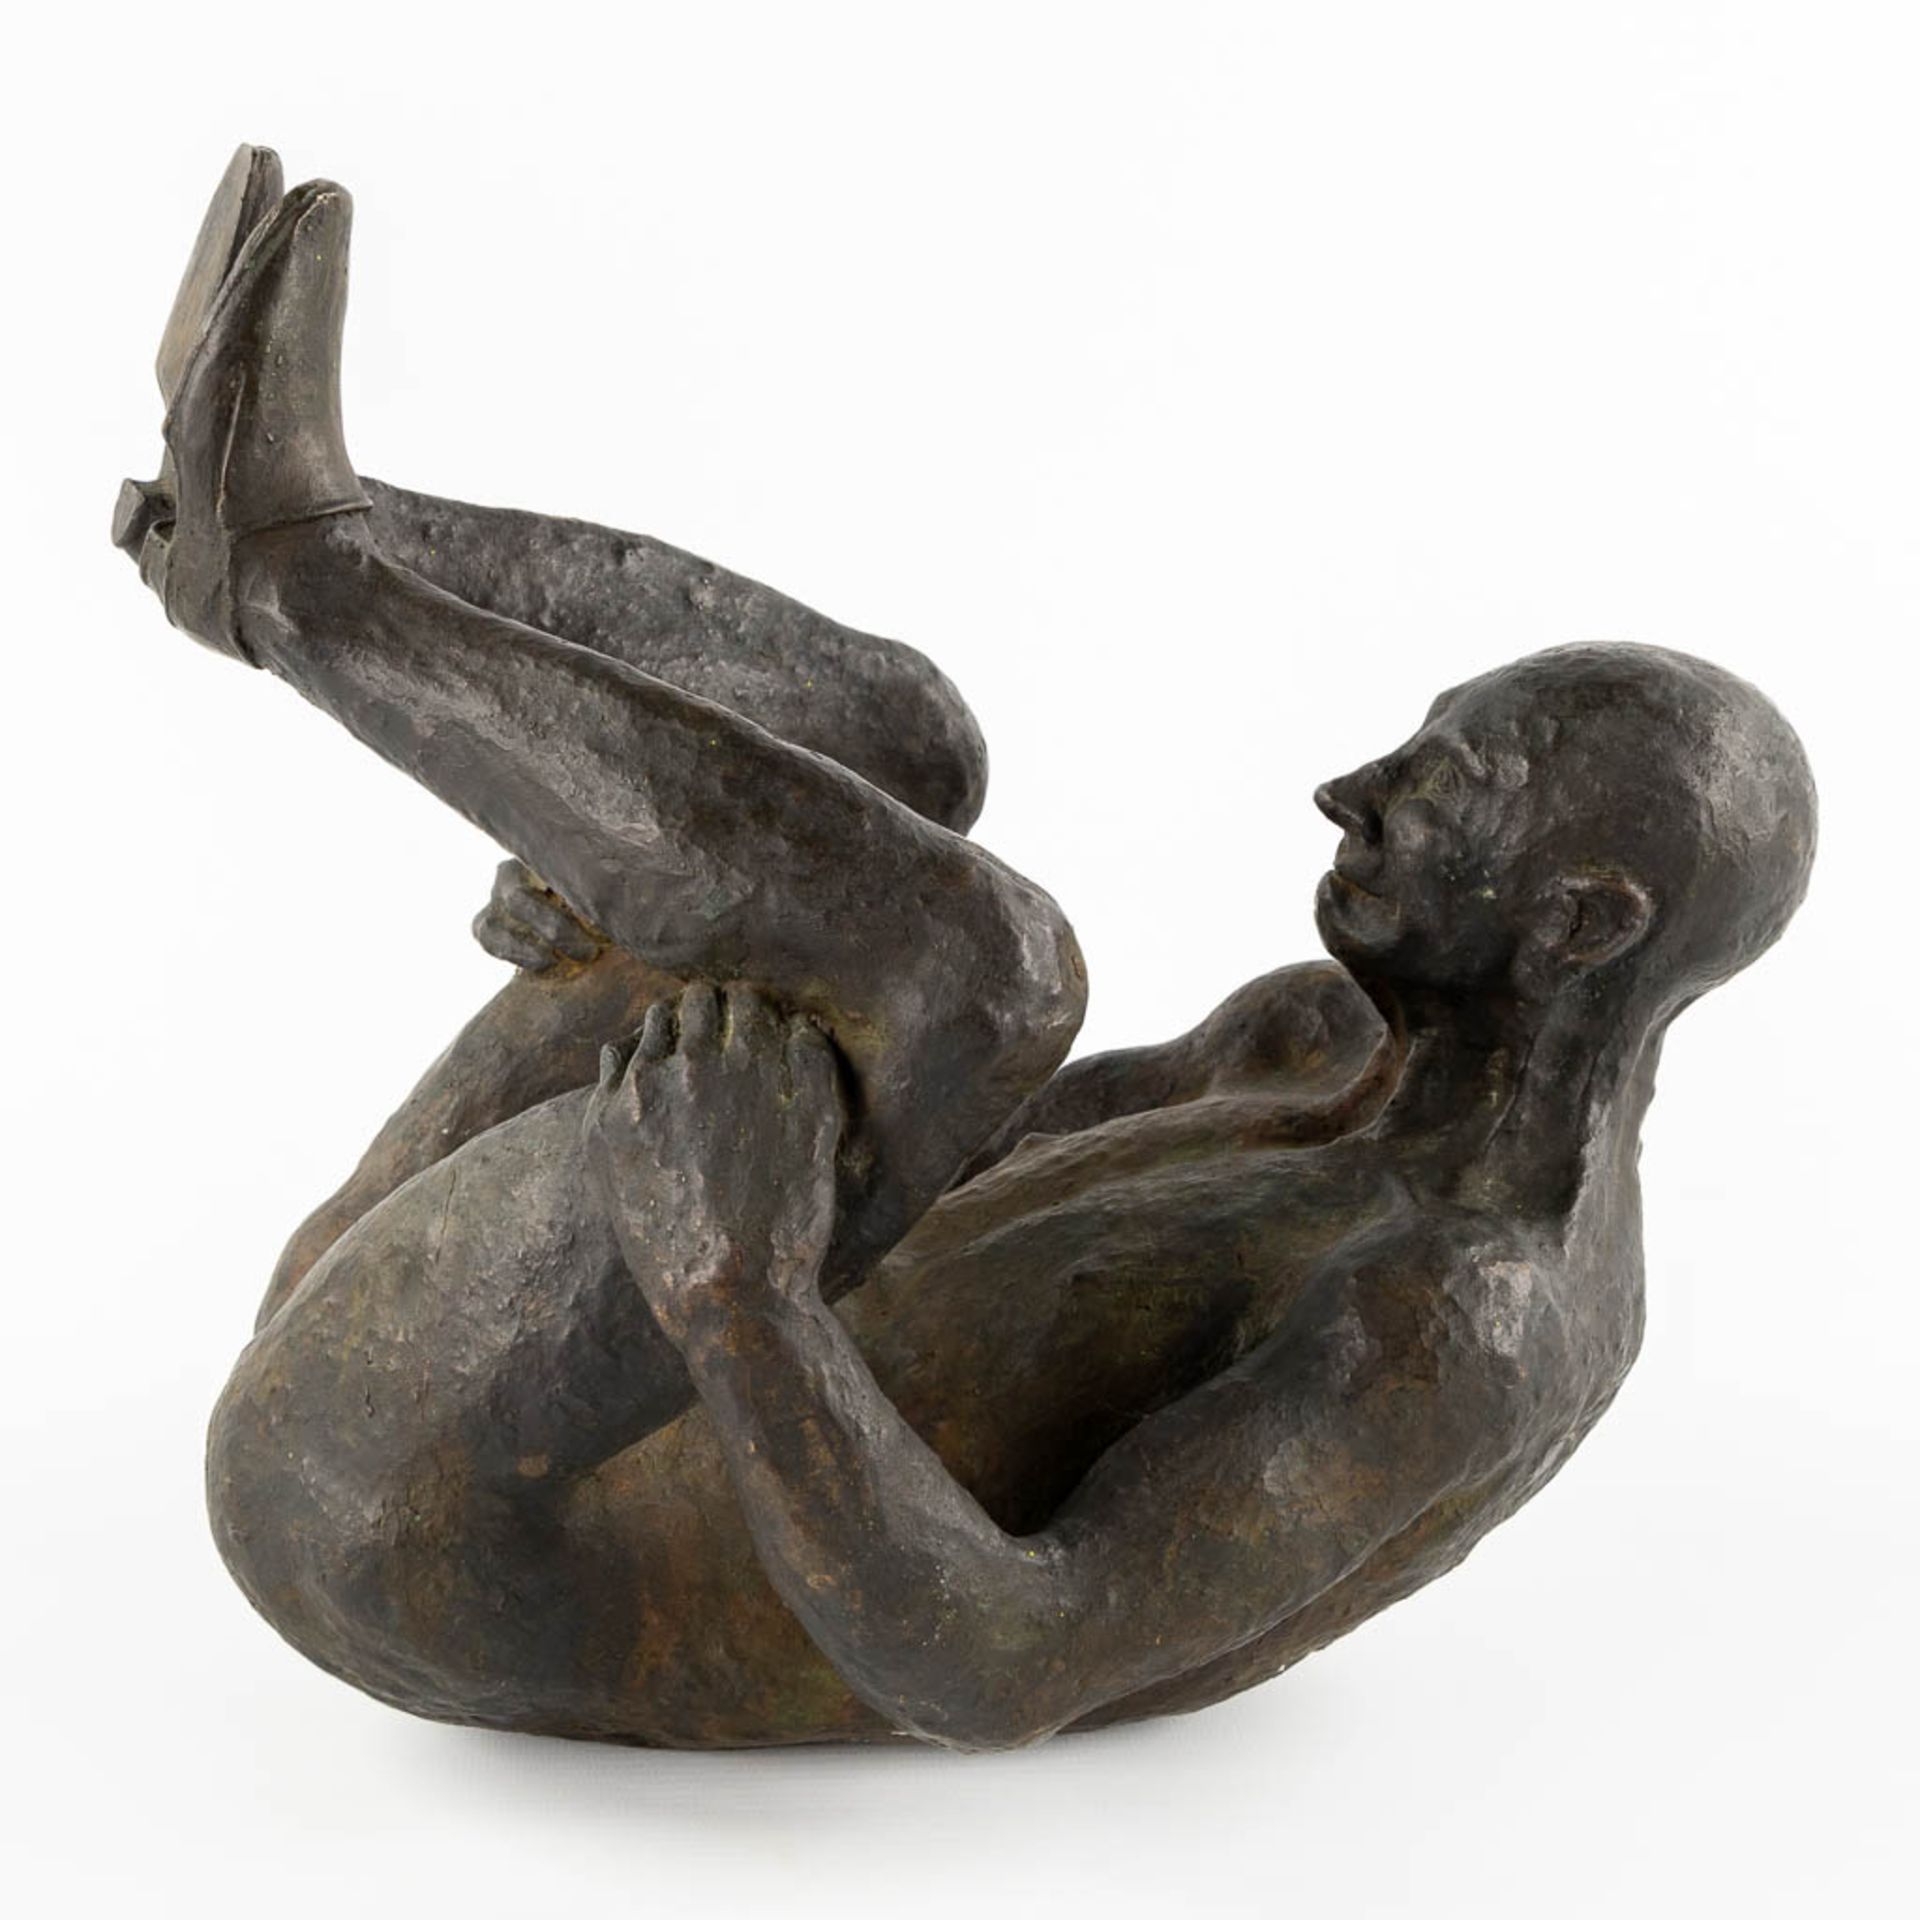 An Exposed Male figure' patinated bronze. (L:22 x W:30 x H:29 cm) - Image 5 of 9